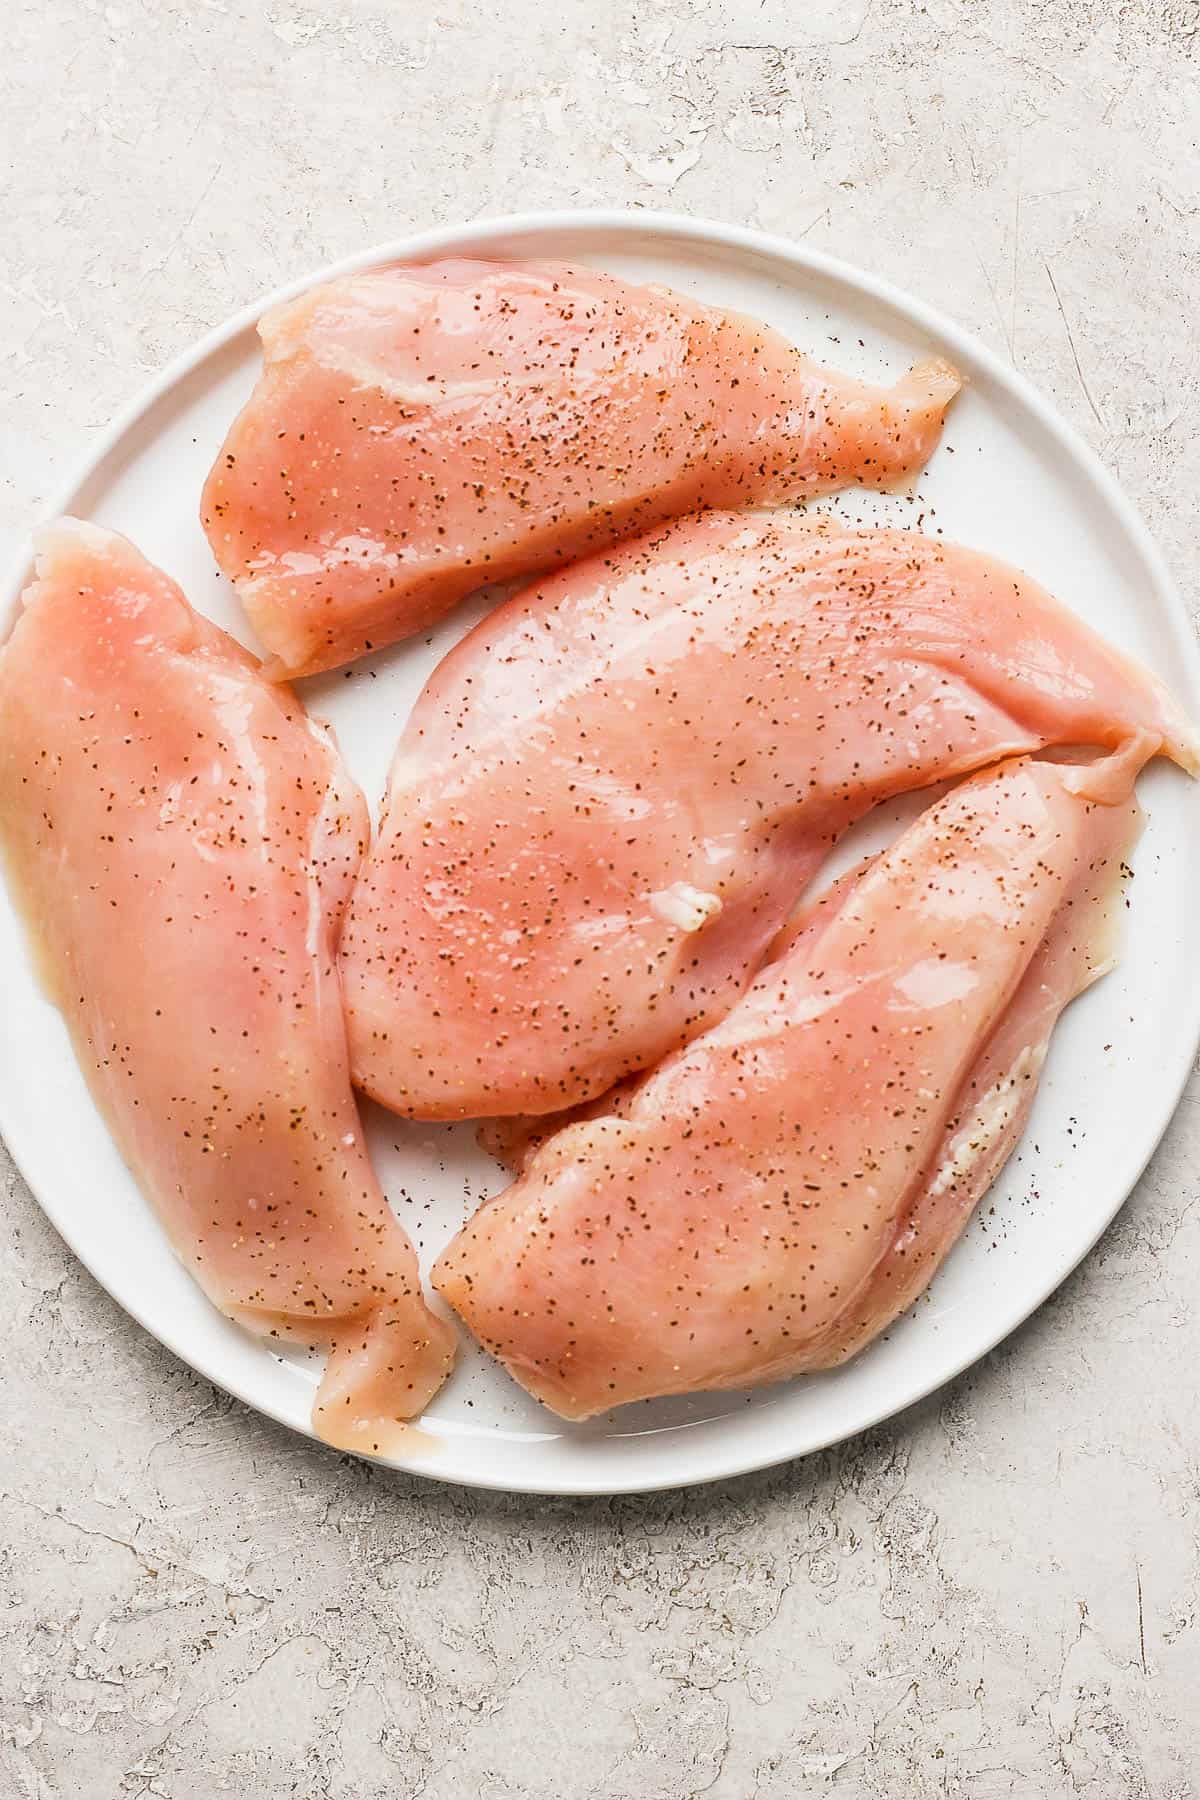 Raw chicken breasts on a white plate seasoned with salt & pepper.